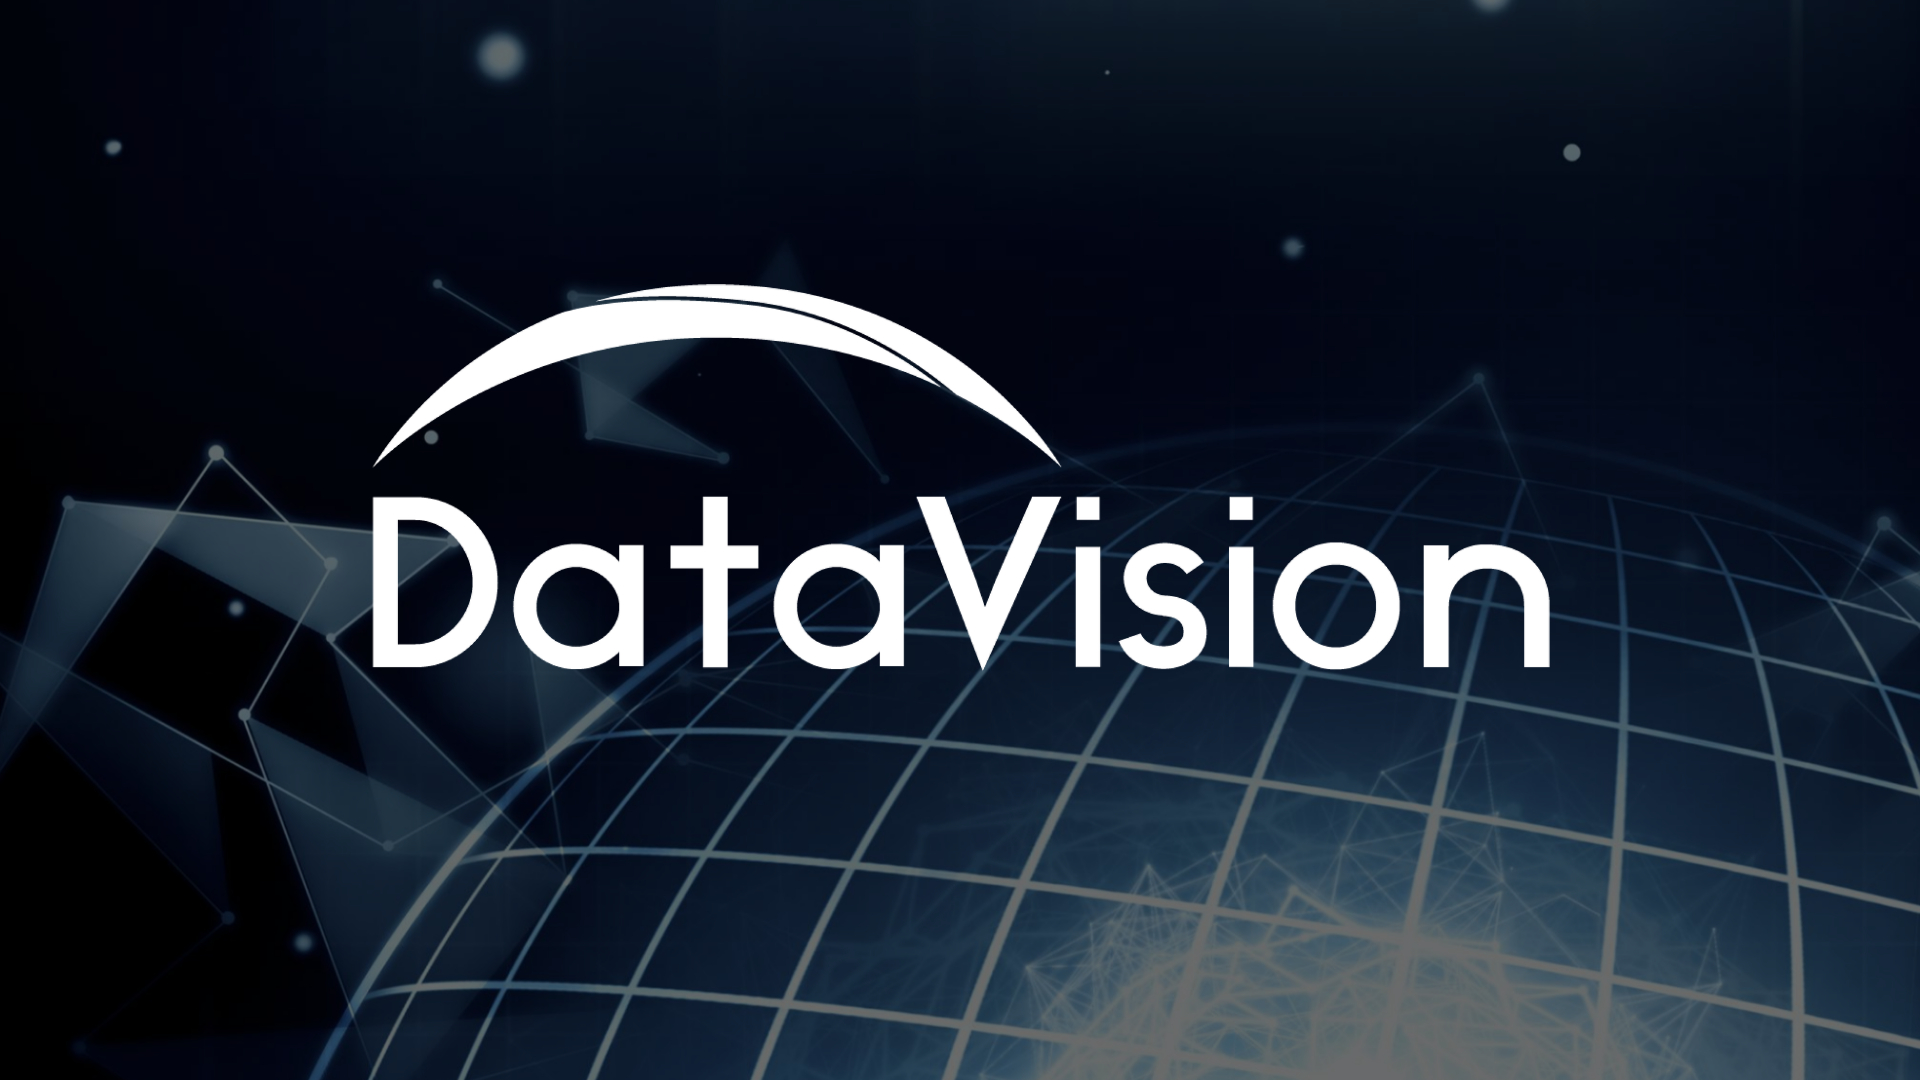 DataVision - Consumer Electronics with Service and Integrity